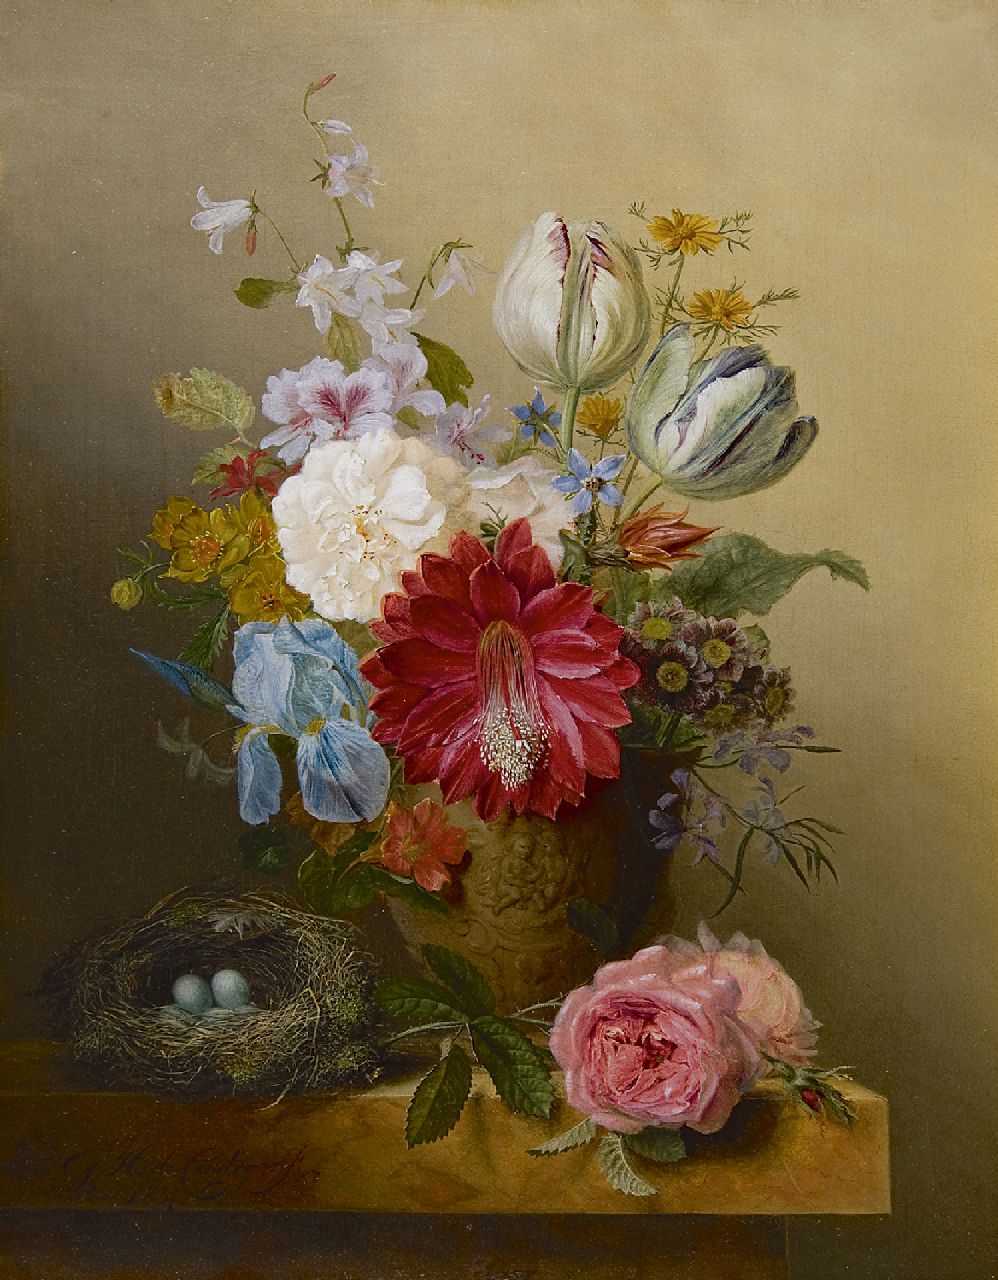 Henriques de Castro G.  | Gabriël Henriques de Castro | Paintings offered for sale | A still life with flowers and a bird's nest, oil on canvas 55.9 x 44.2 cm, signed l.l. and dated 1837